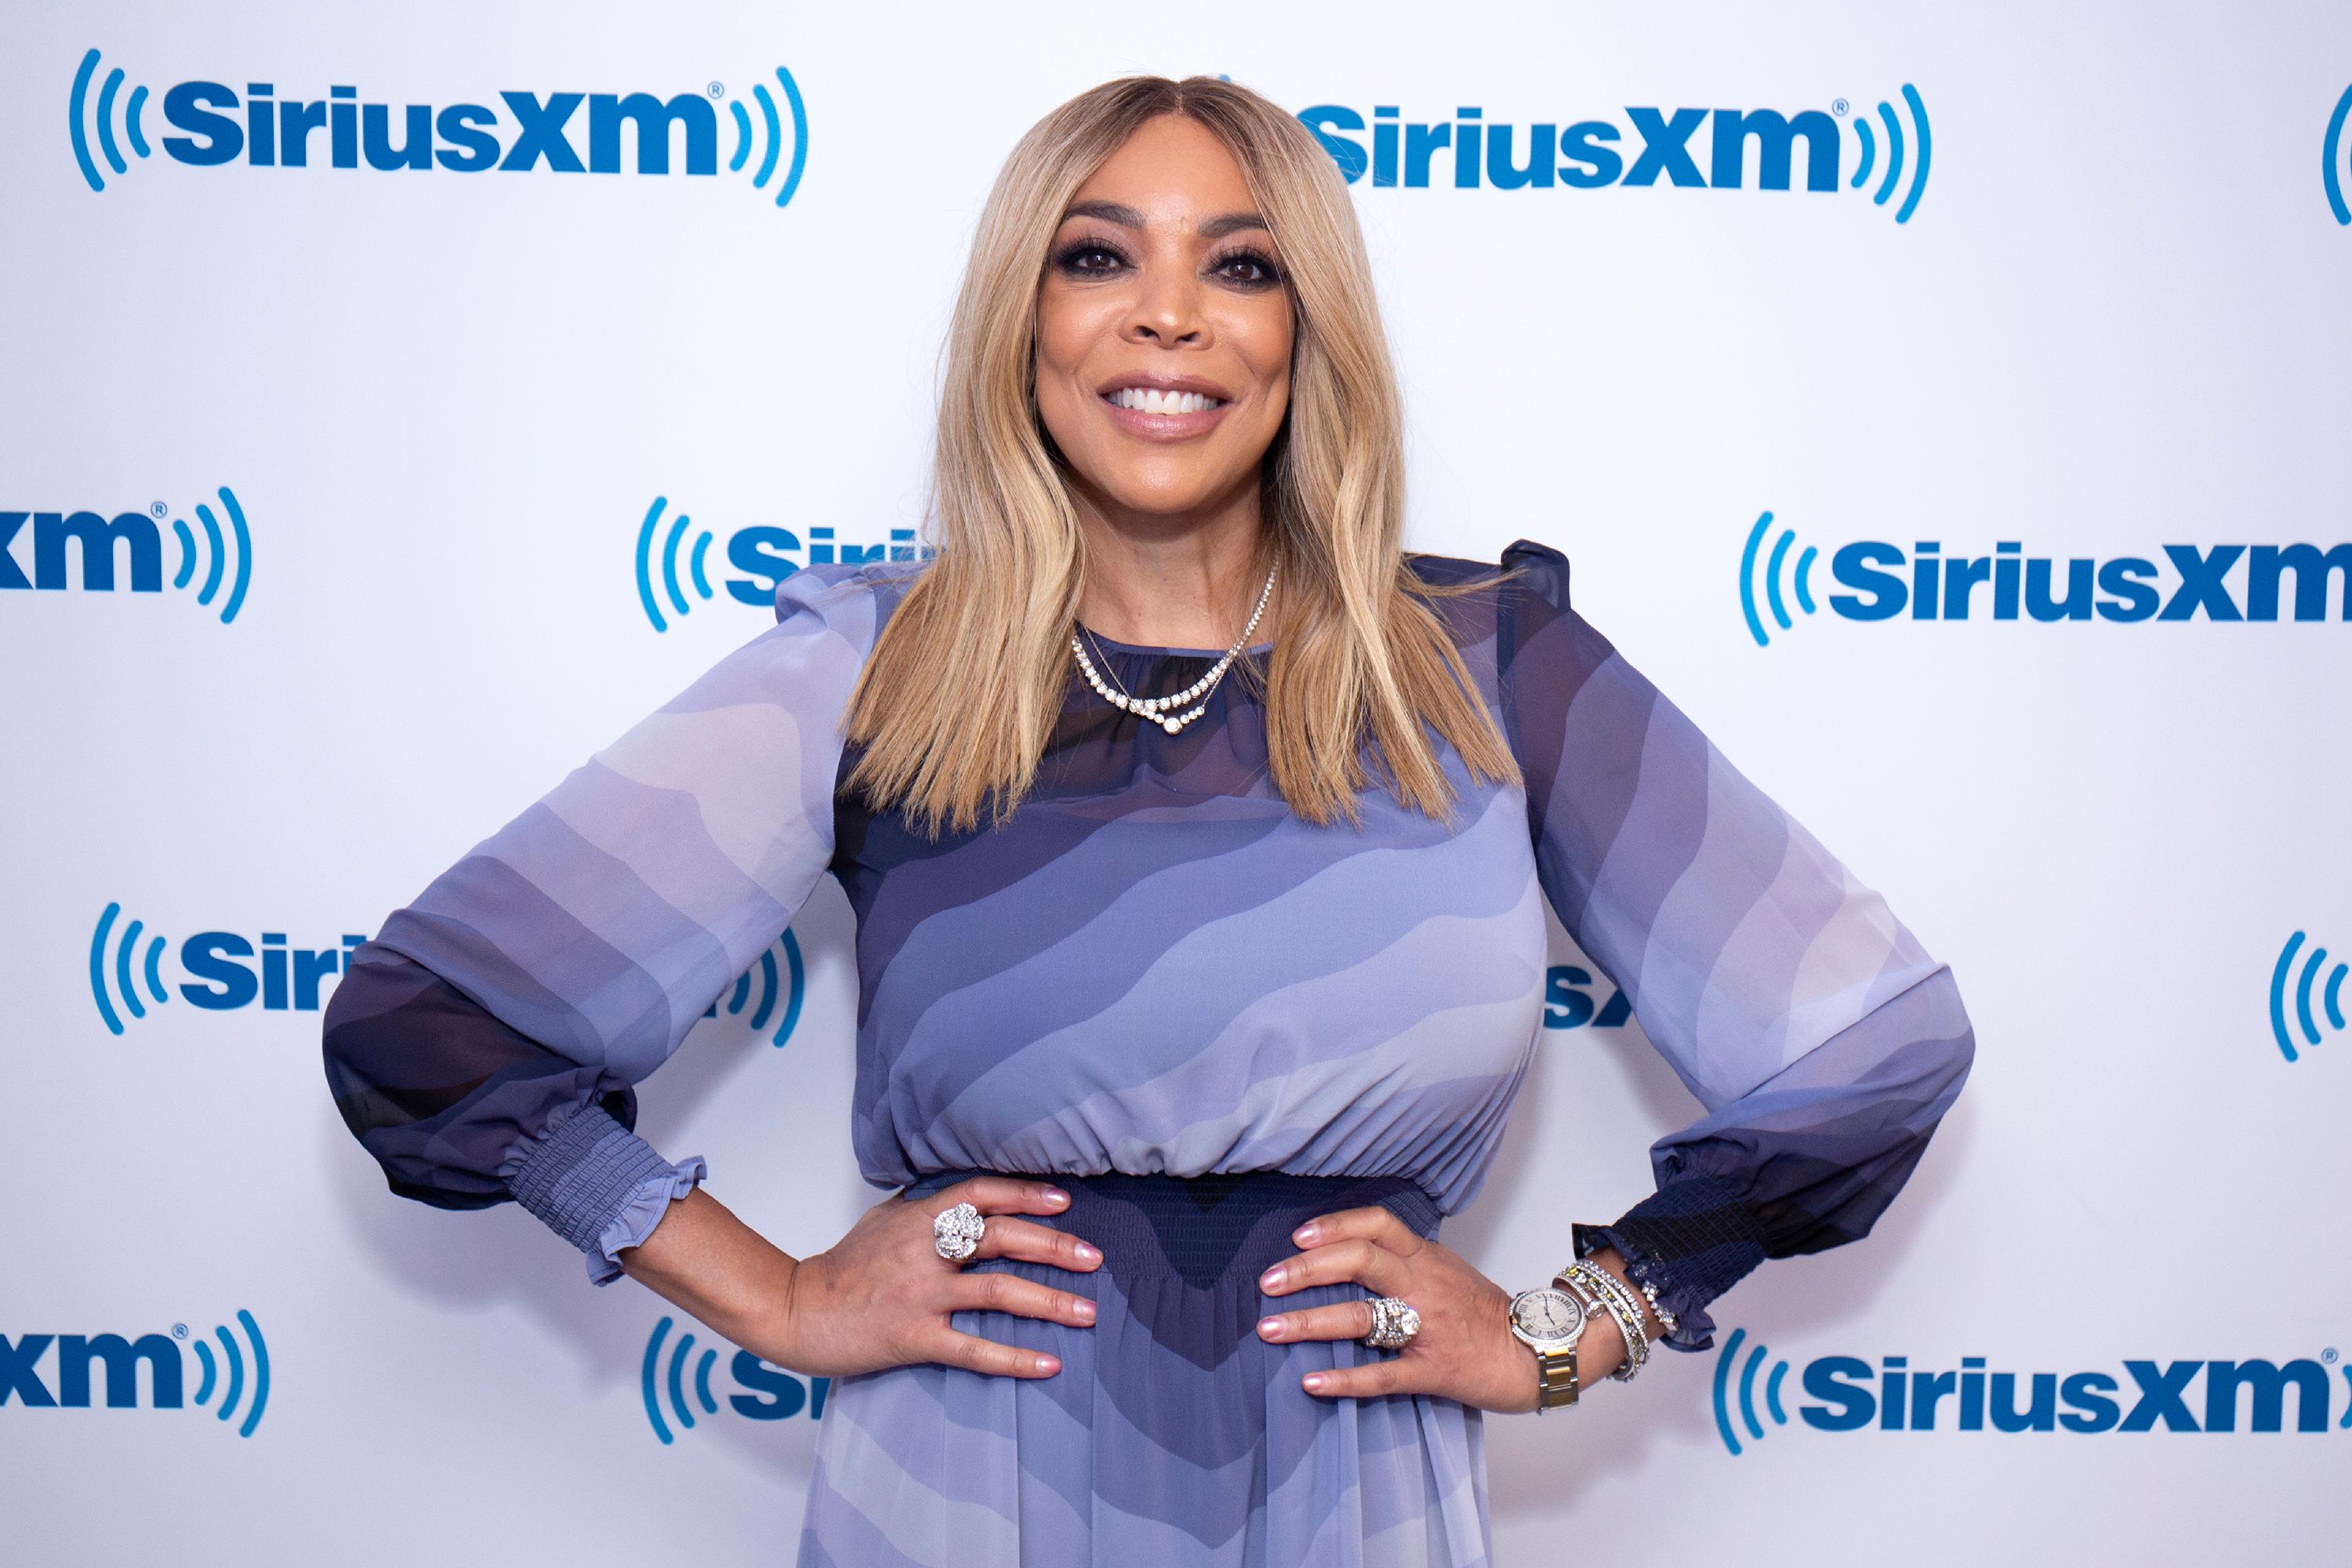 Wendy WIlliams Had Some Shady Words For Taylor Swift After Her ‘Artist of the Decade’ Award At The AMA’s